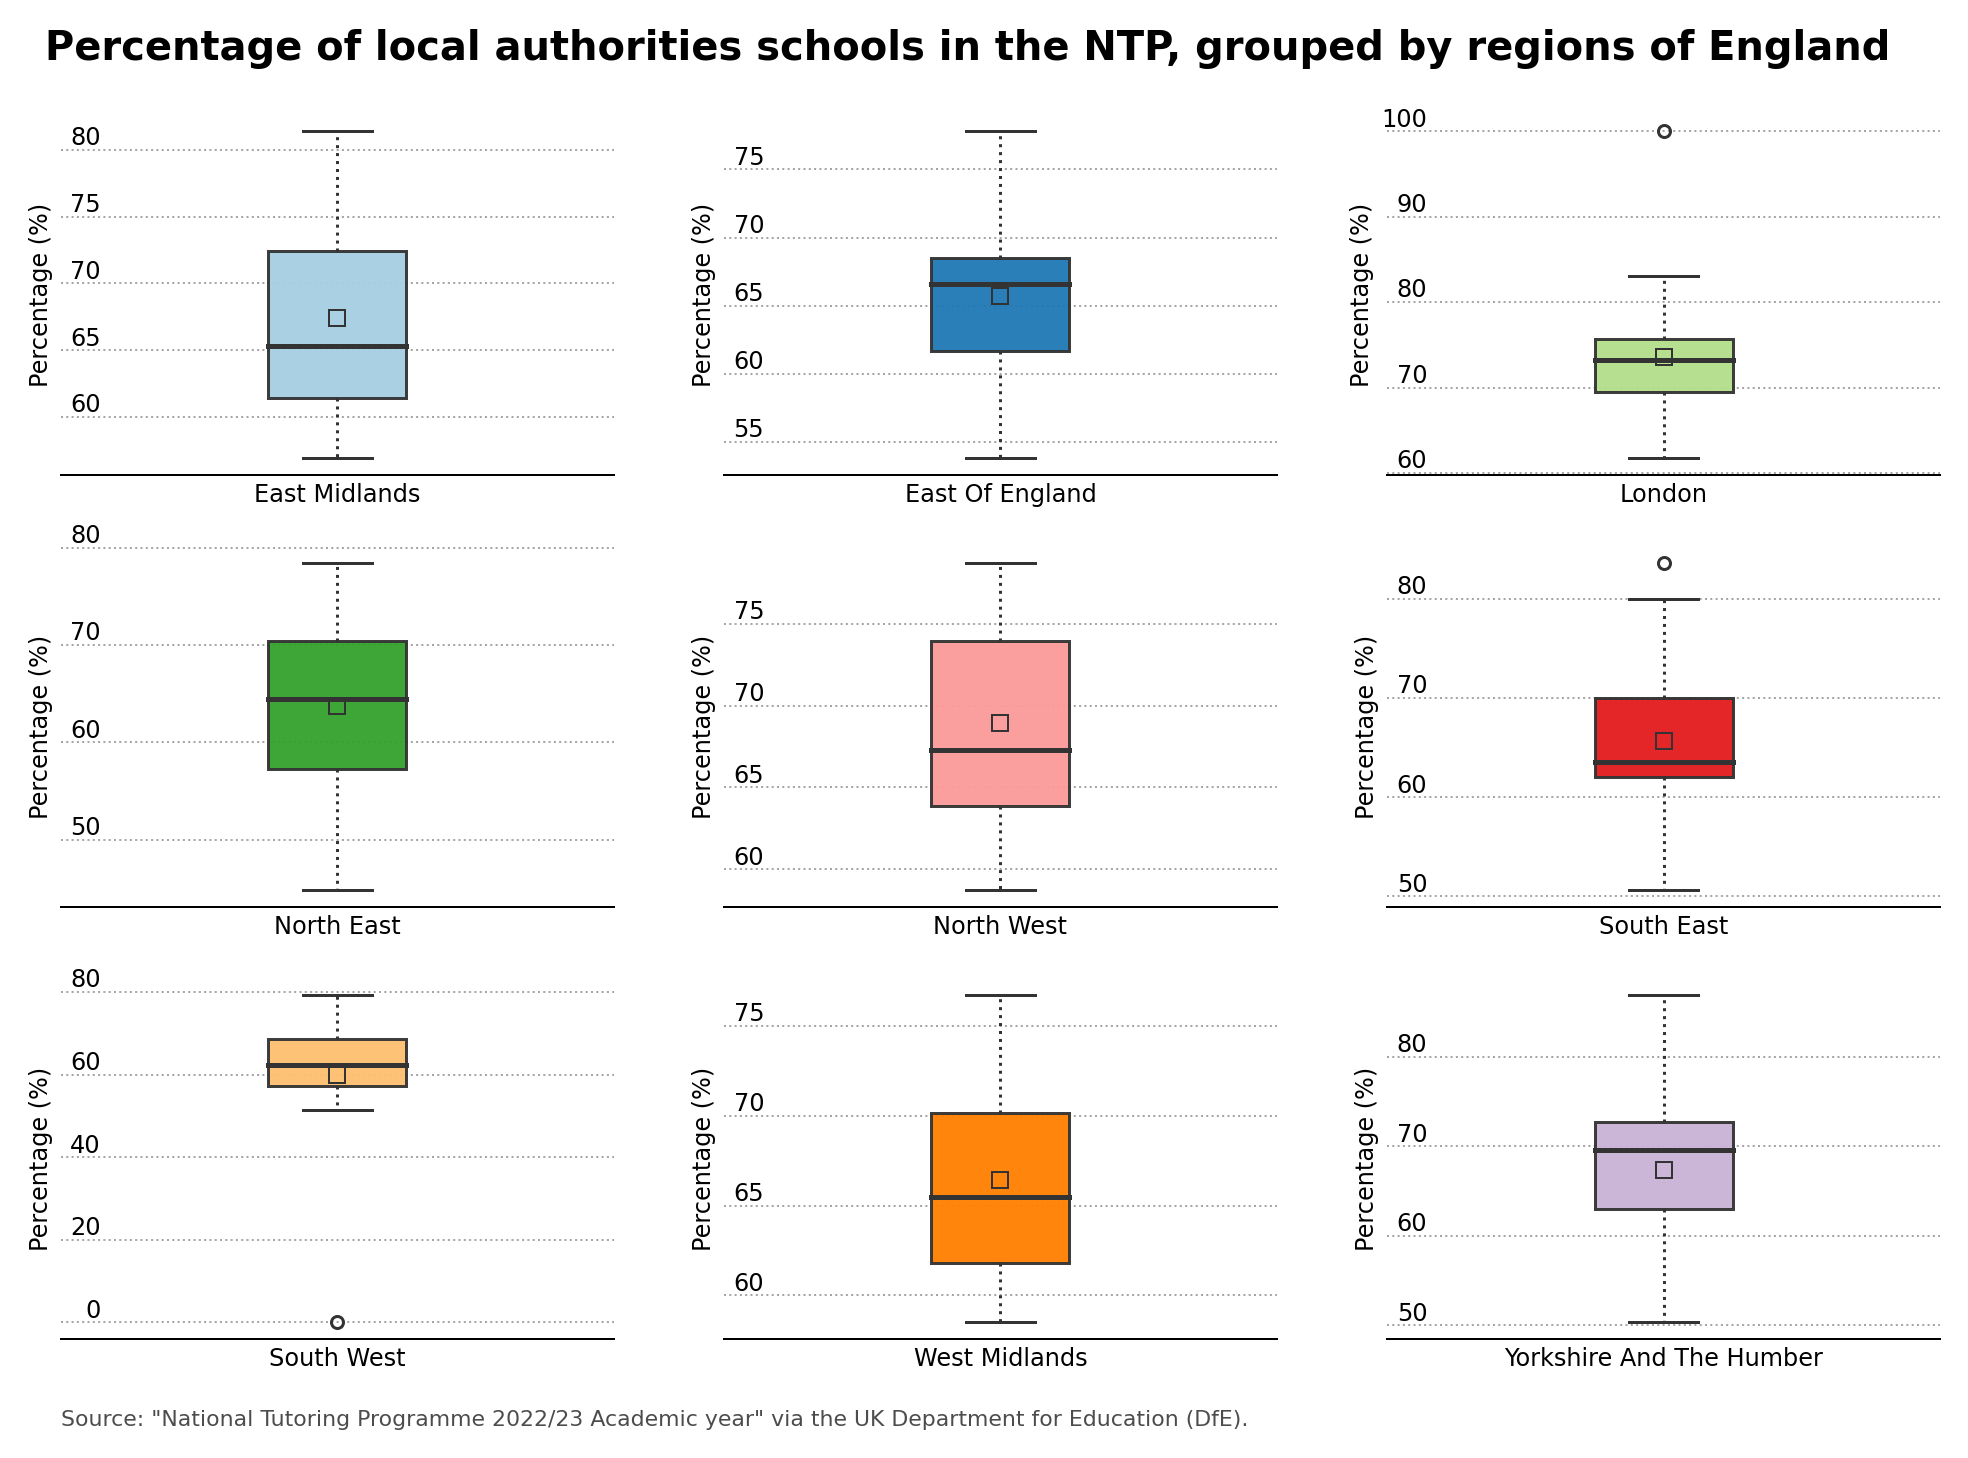 Percentage of local authorities schools in the NTP, grouped by regions of England